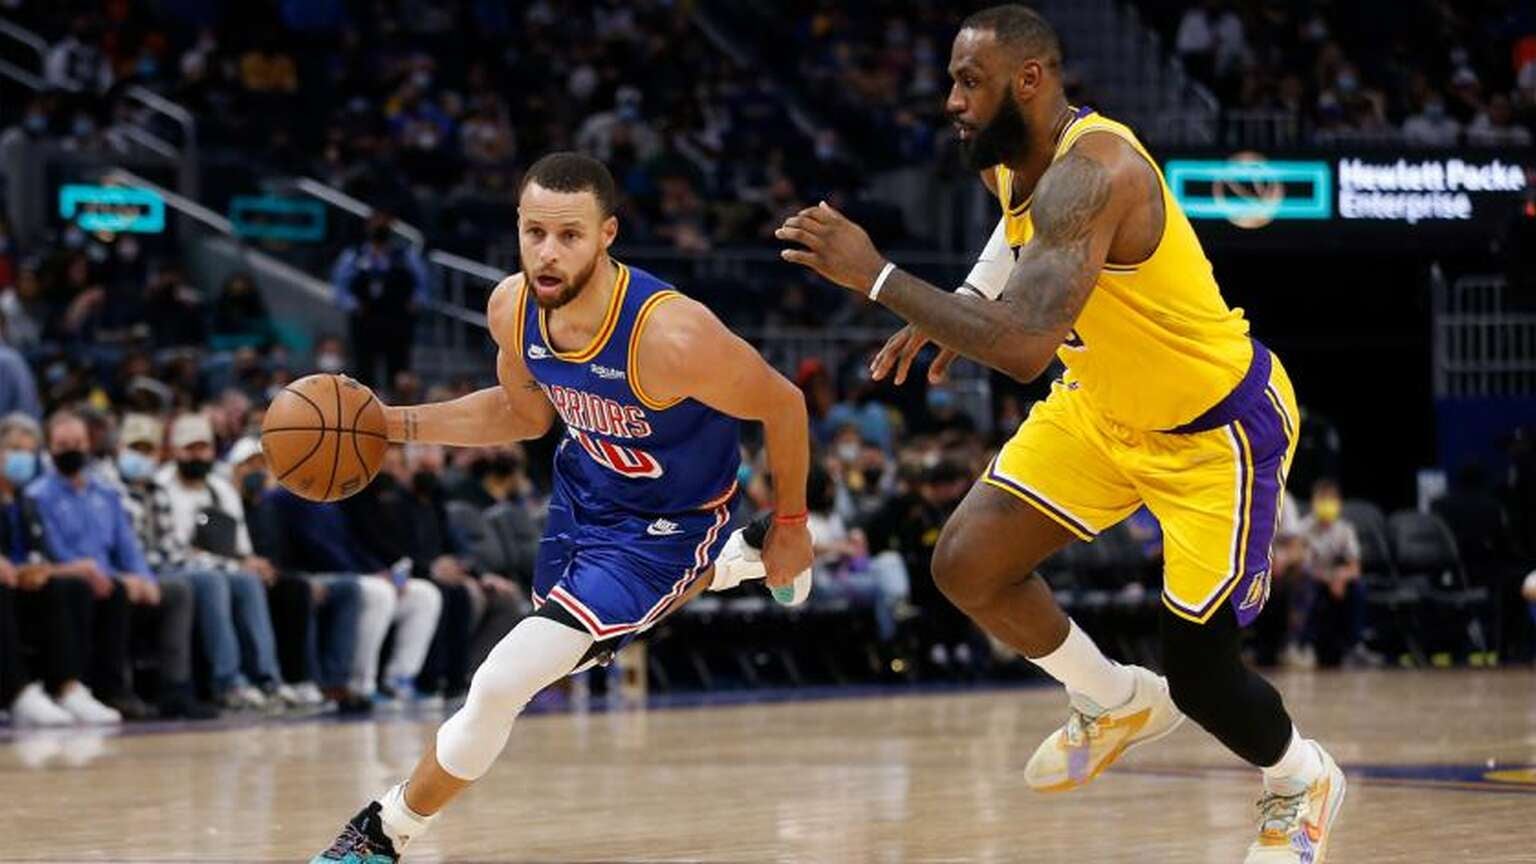 How to Watch the 2023 NBA Playoffs LeBron James' Lakers vs. Steph Curry